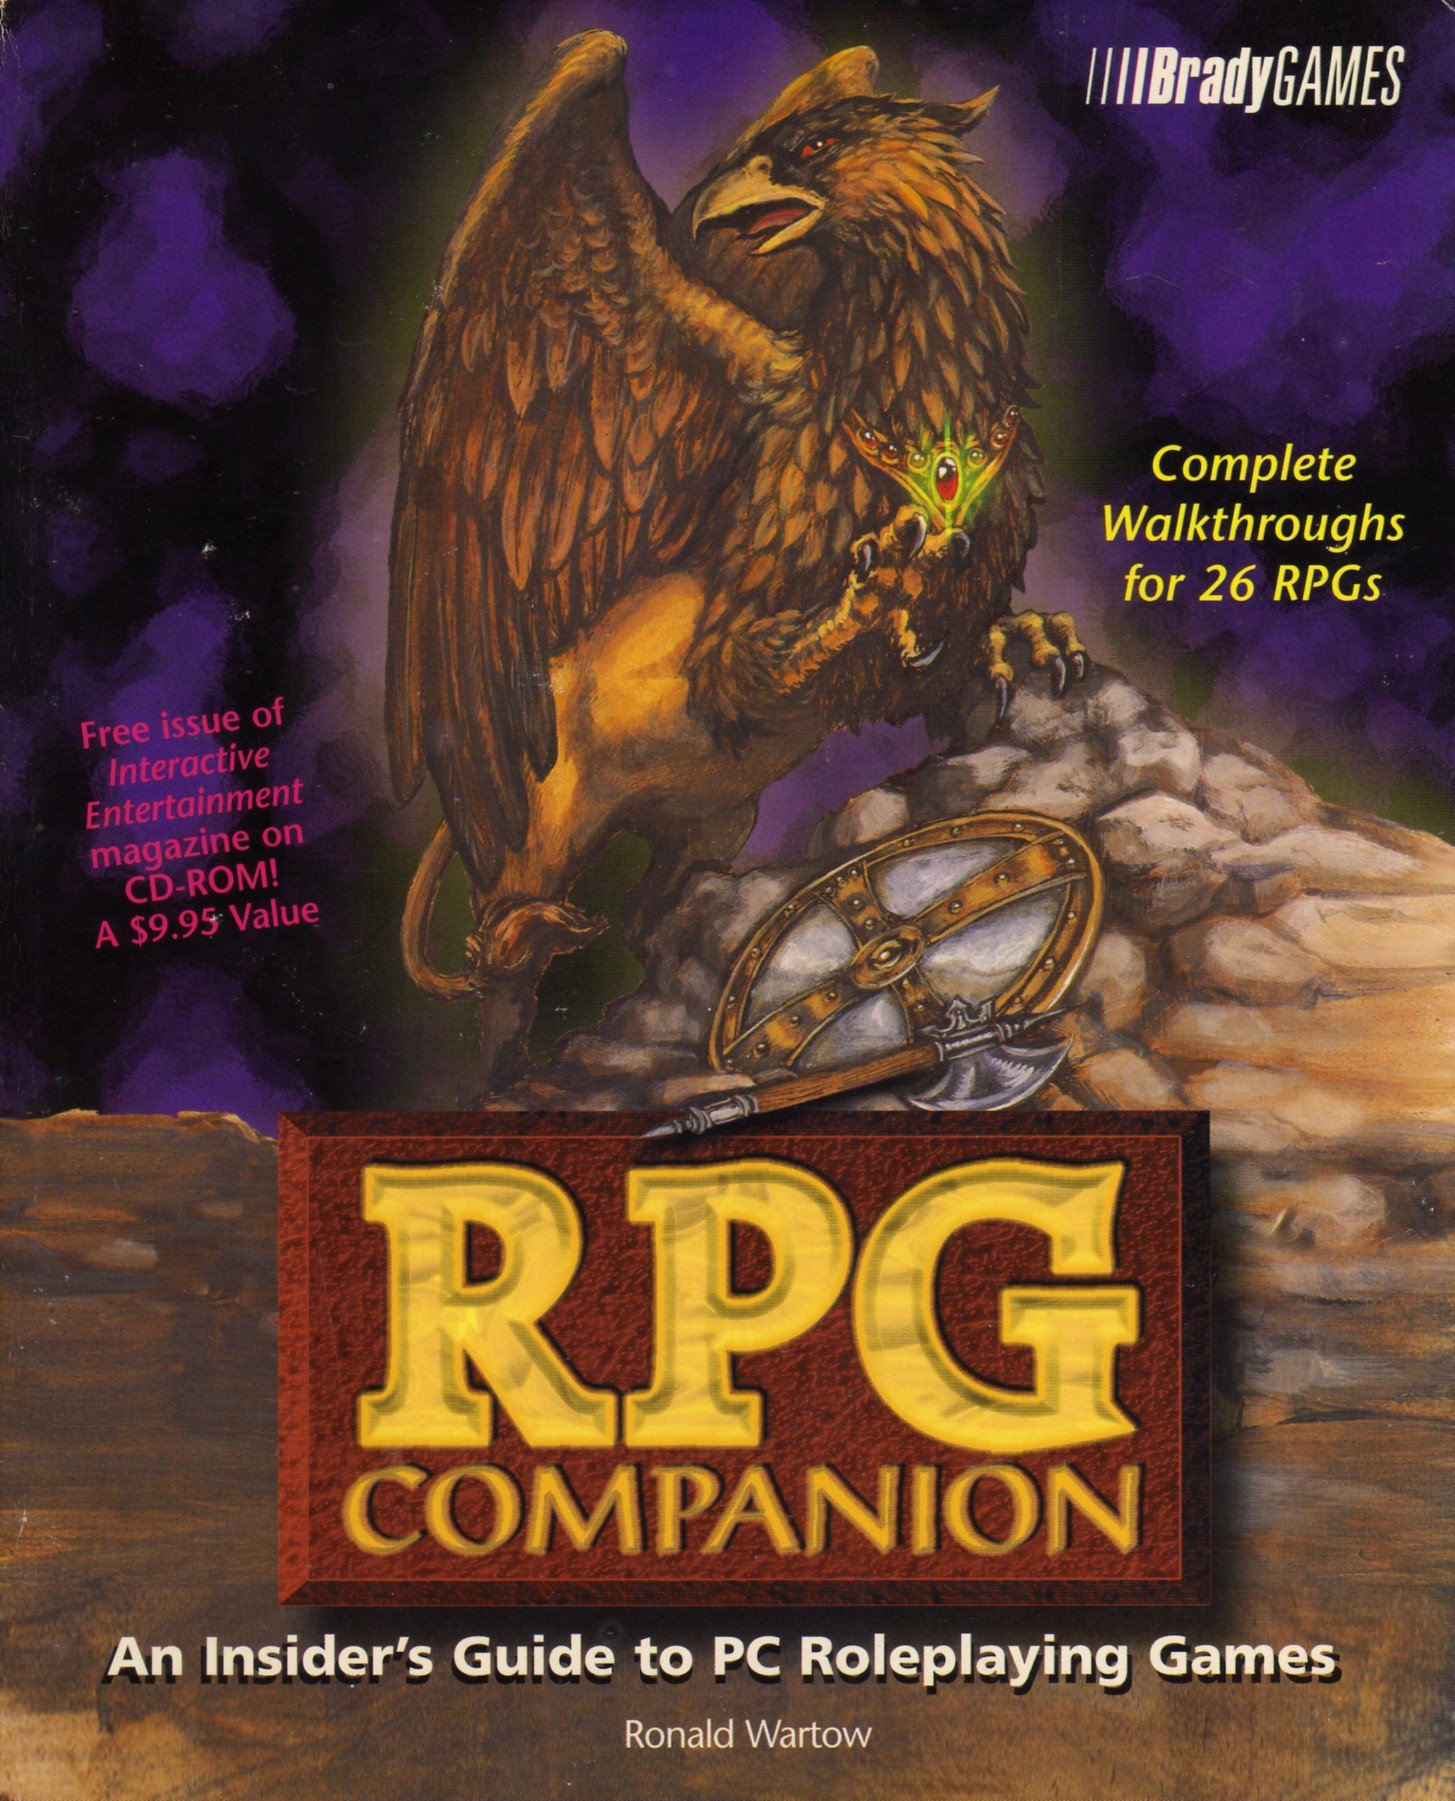 RPG Companion: An Insider's Guide to PC Roleplaying Games